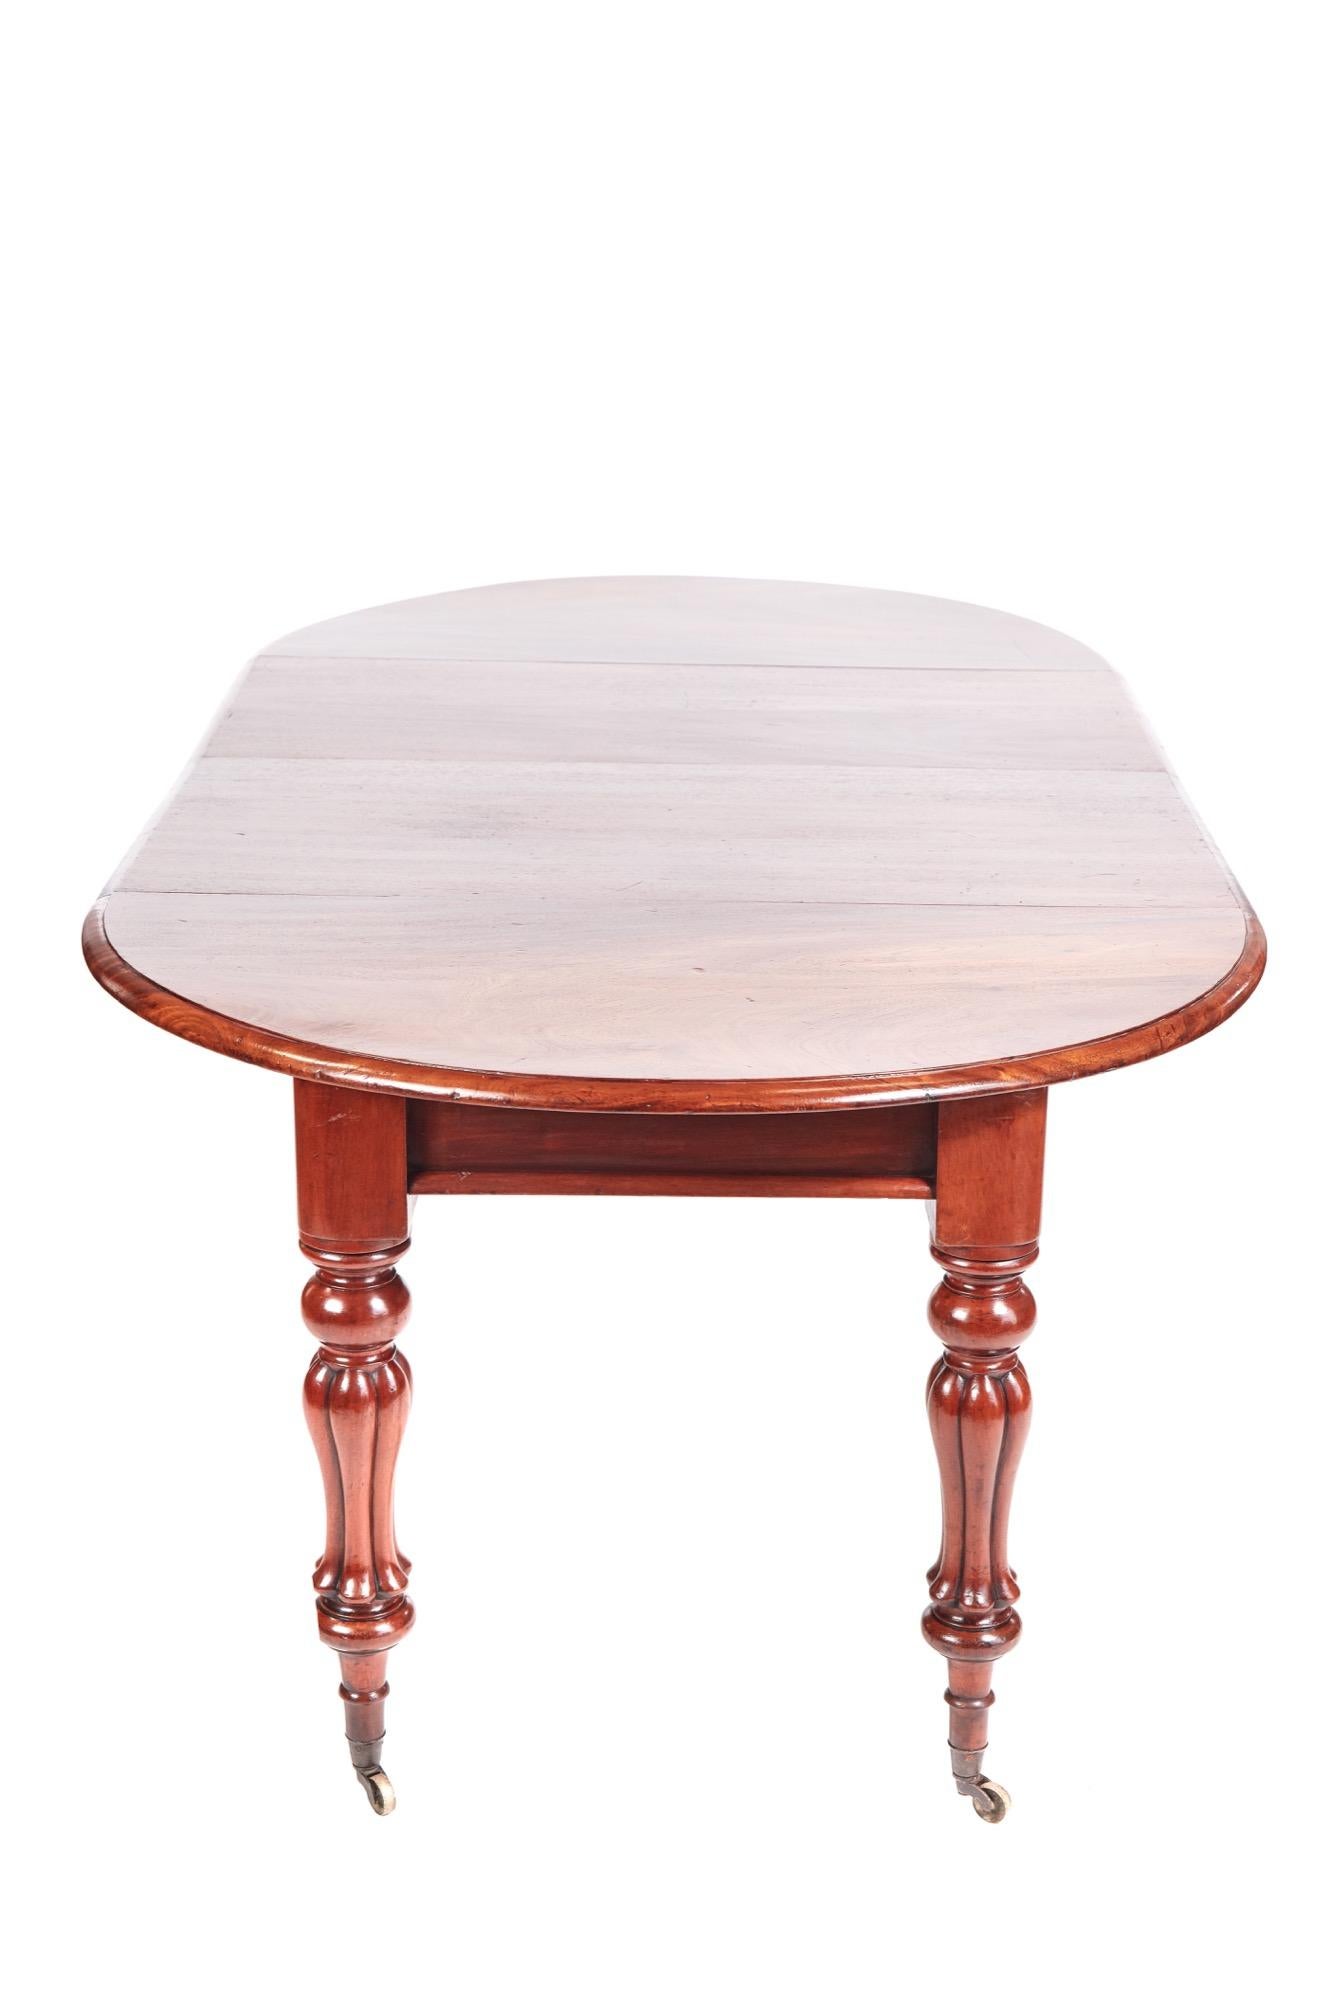 Quality Antique William IV mahogany extending dining table having a splendid quality mahogany top with a moulded edge, it boasts two large extra leaves and also makes a perfect round table. It stands on four elegantly shaped reeded legs with